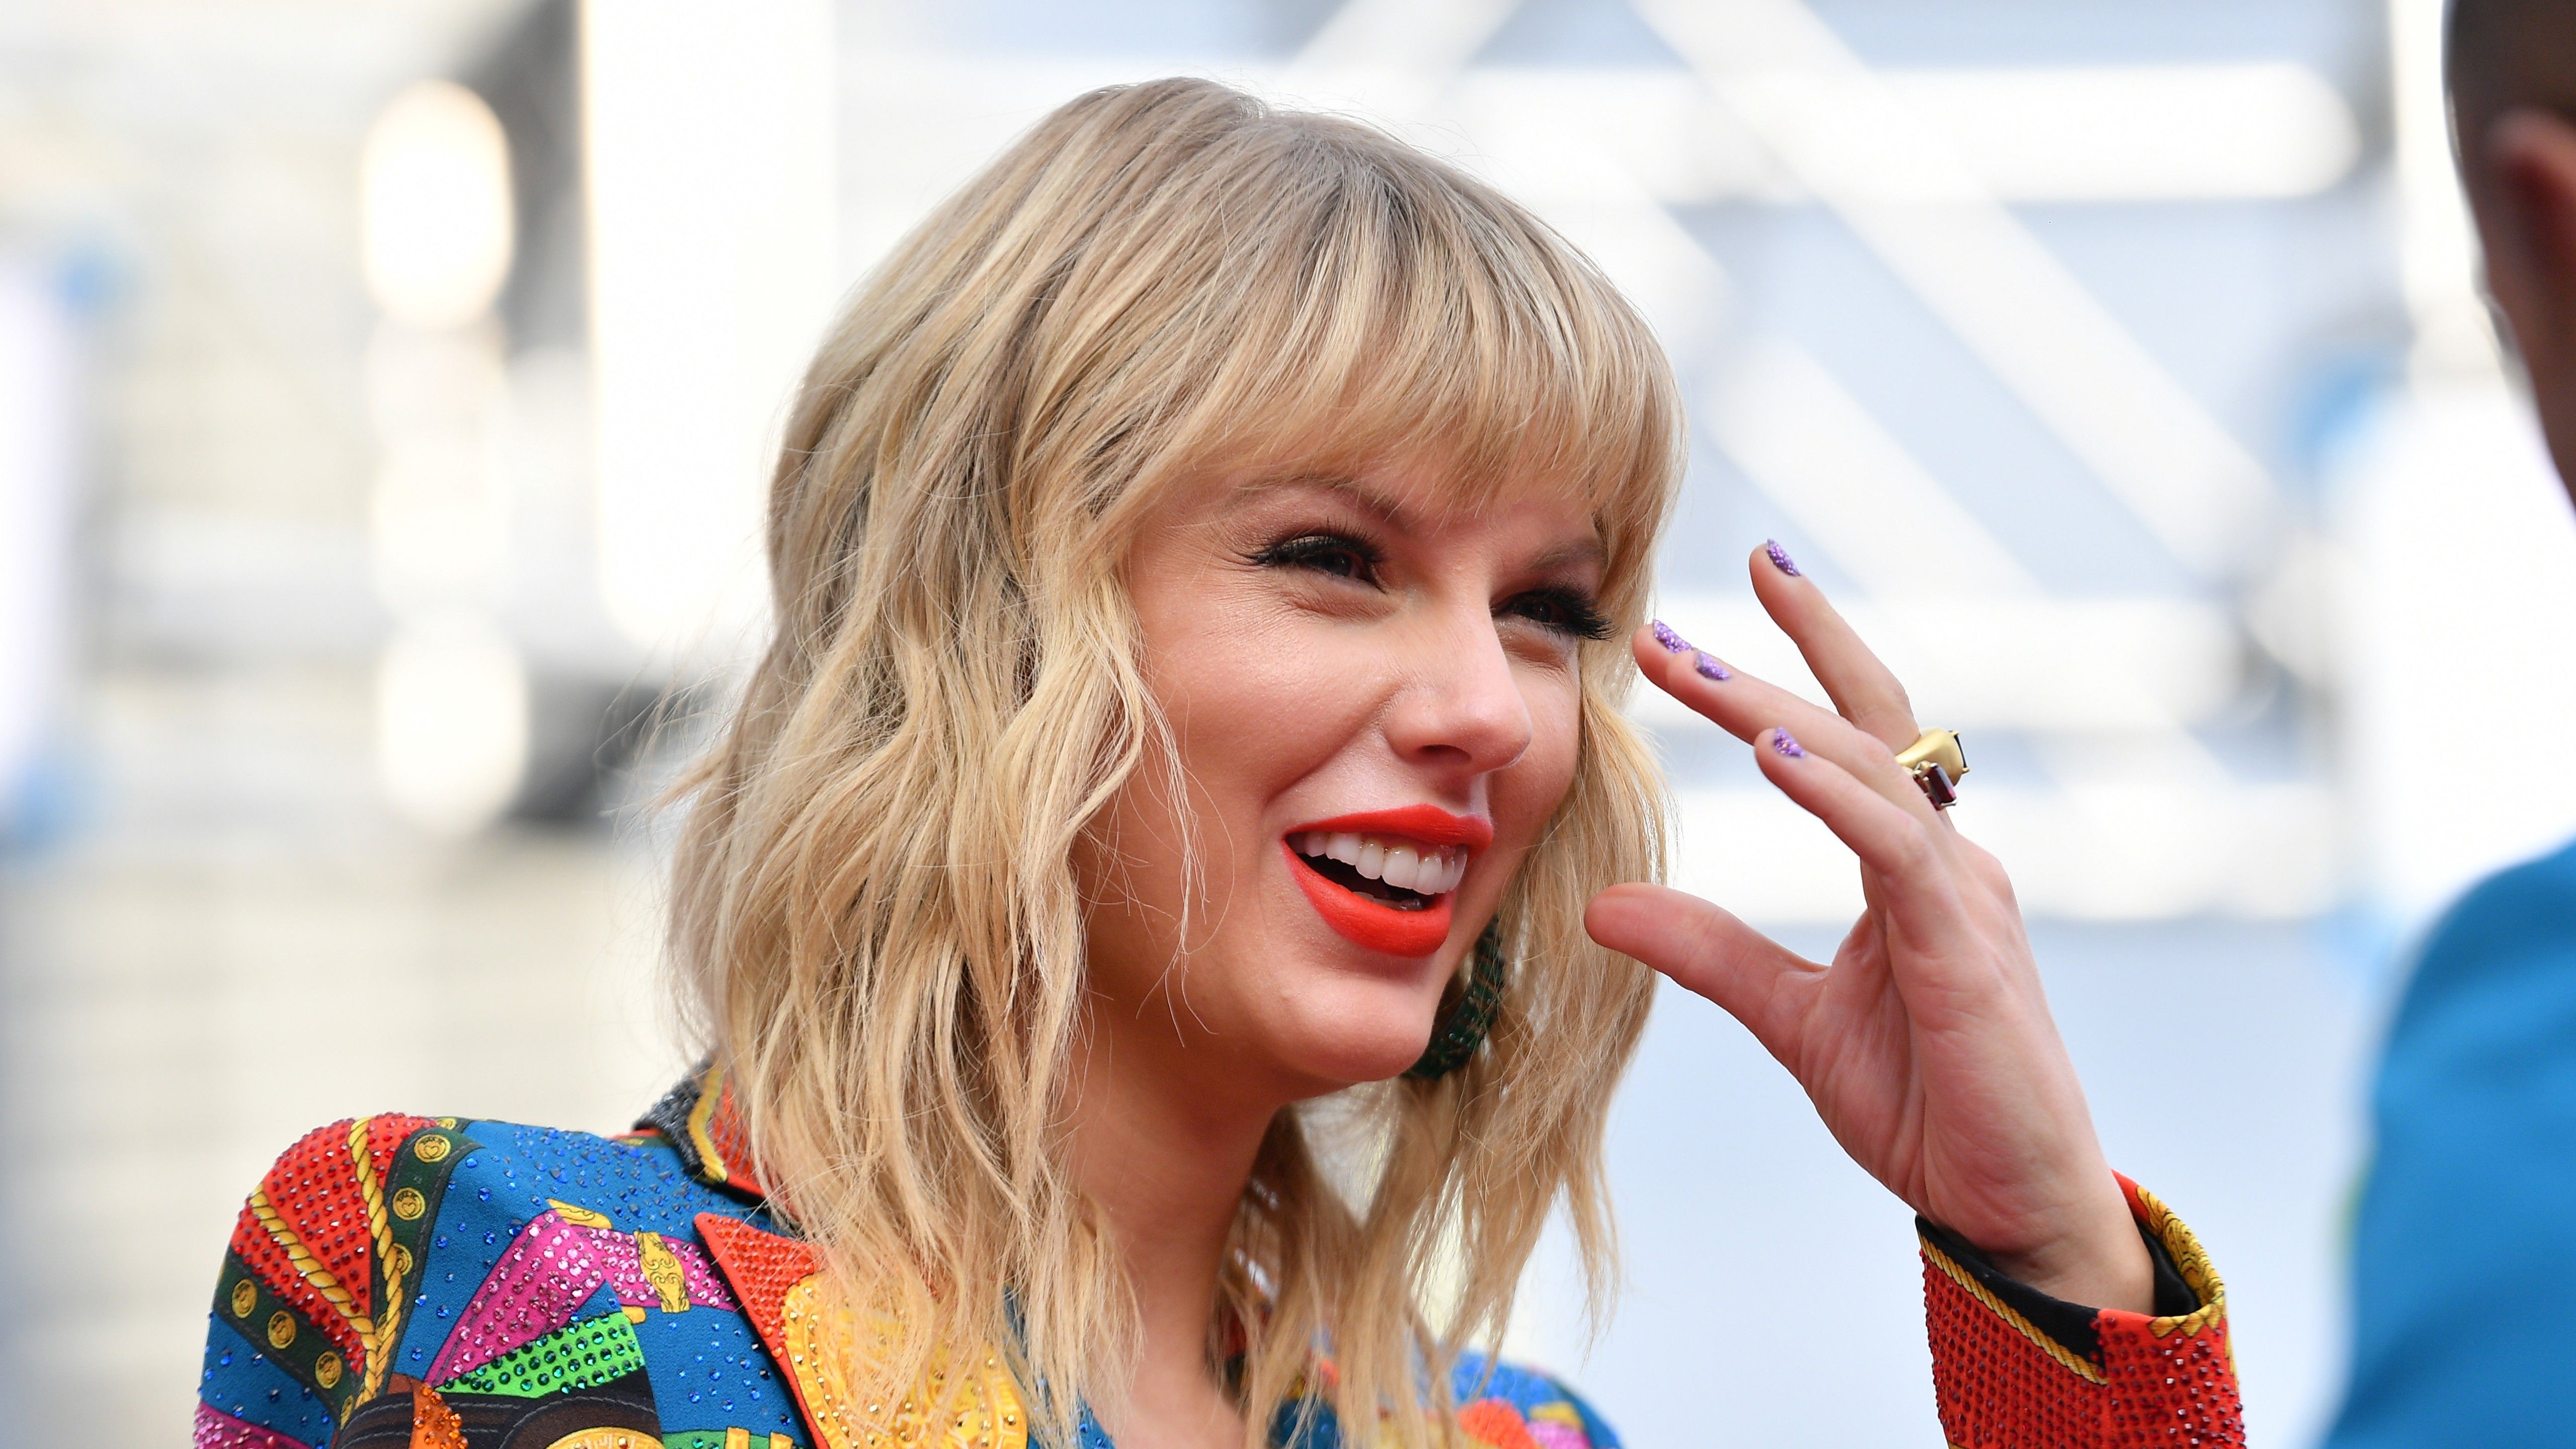 Smiling Taylor Swift With Blonde Hair And Lipstick 4K 5K HD Taylor Swift Wallpaper